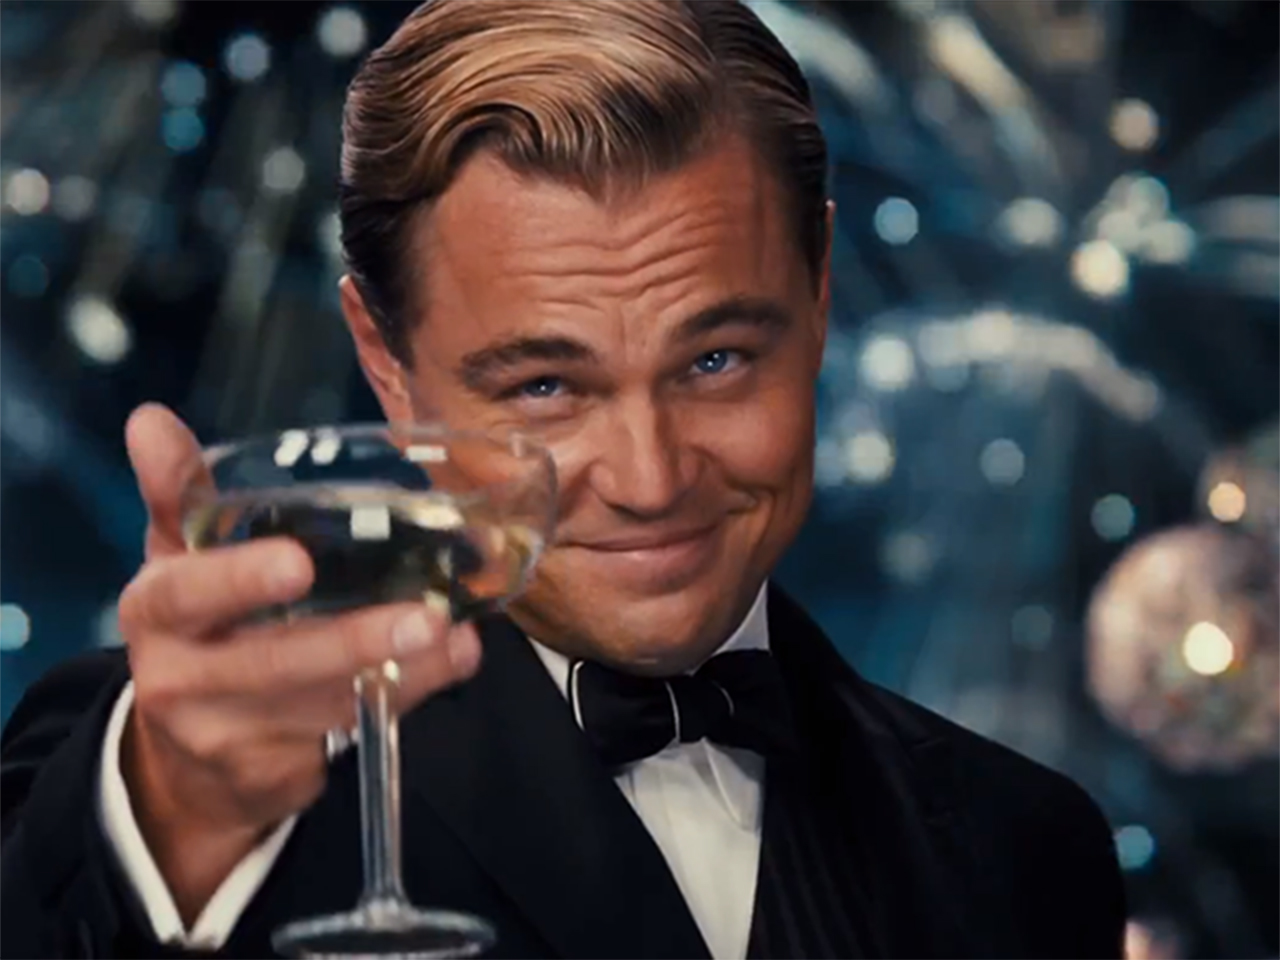 DiCaprio toasting Blank Meme Template